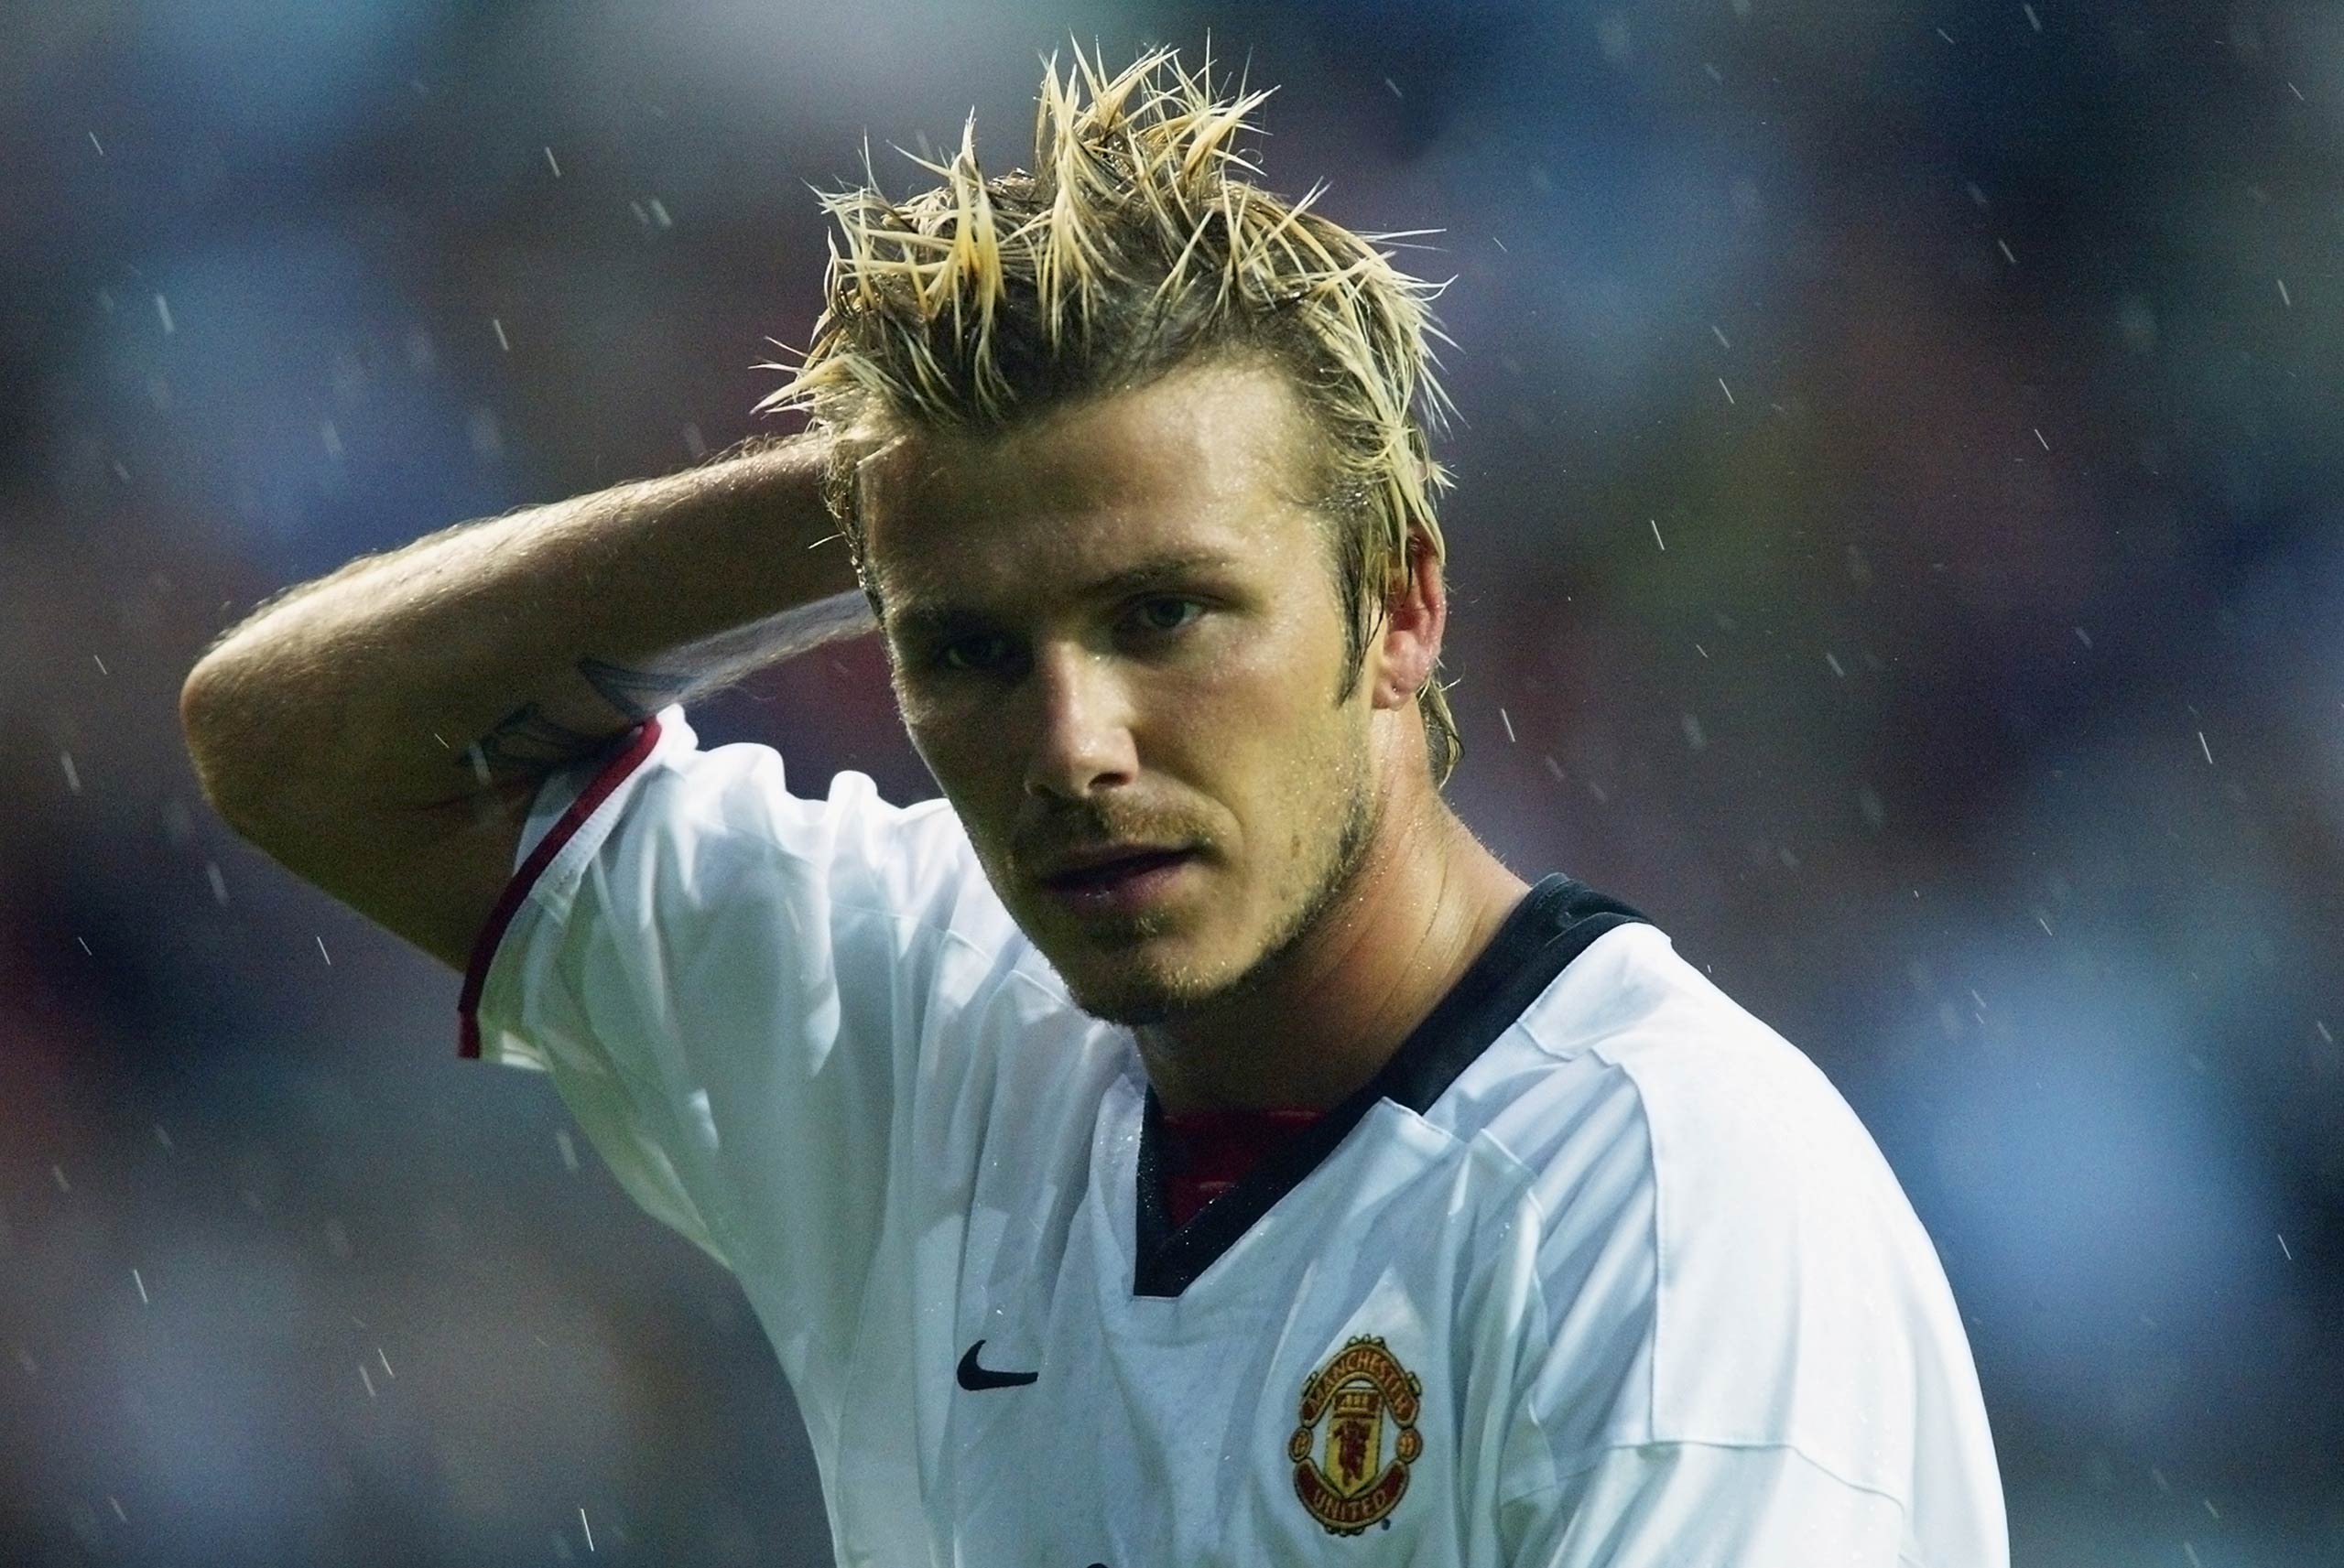 David Beckham of Manchester United plays during a Pre-Season Amsterdam Tournament match between Manchester United and Parma at the Amsterdam ArenA, in Amsterdam, Holland in 2002.